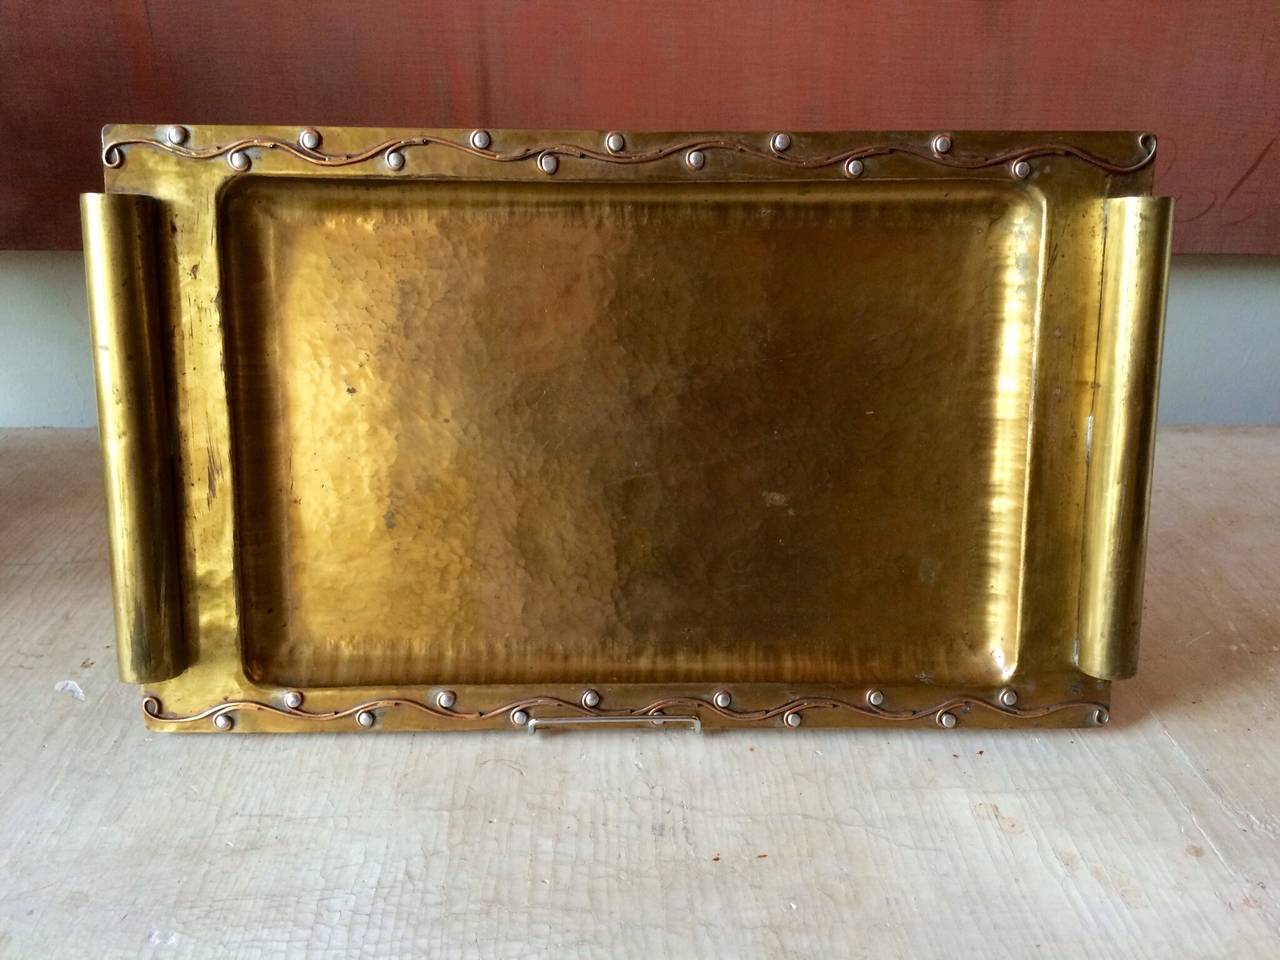 A handcrafted hammered rectangular brass handled tray with copper and silver raised trailing vine design.